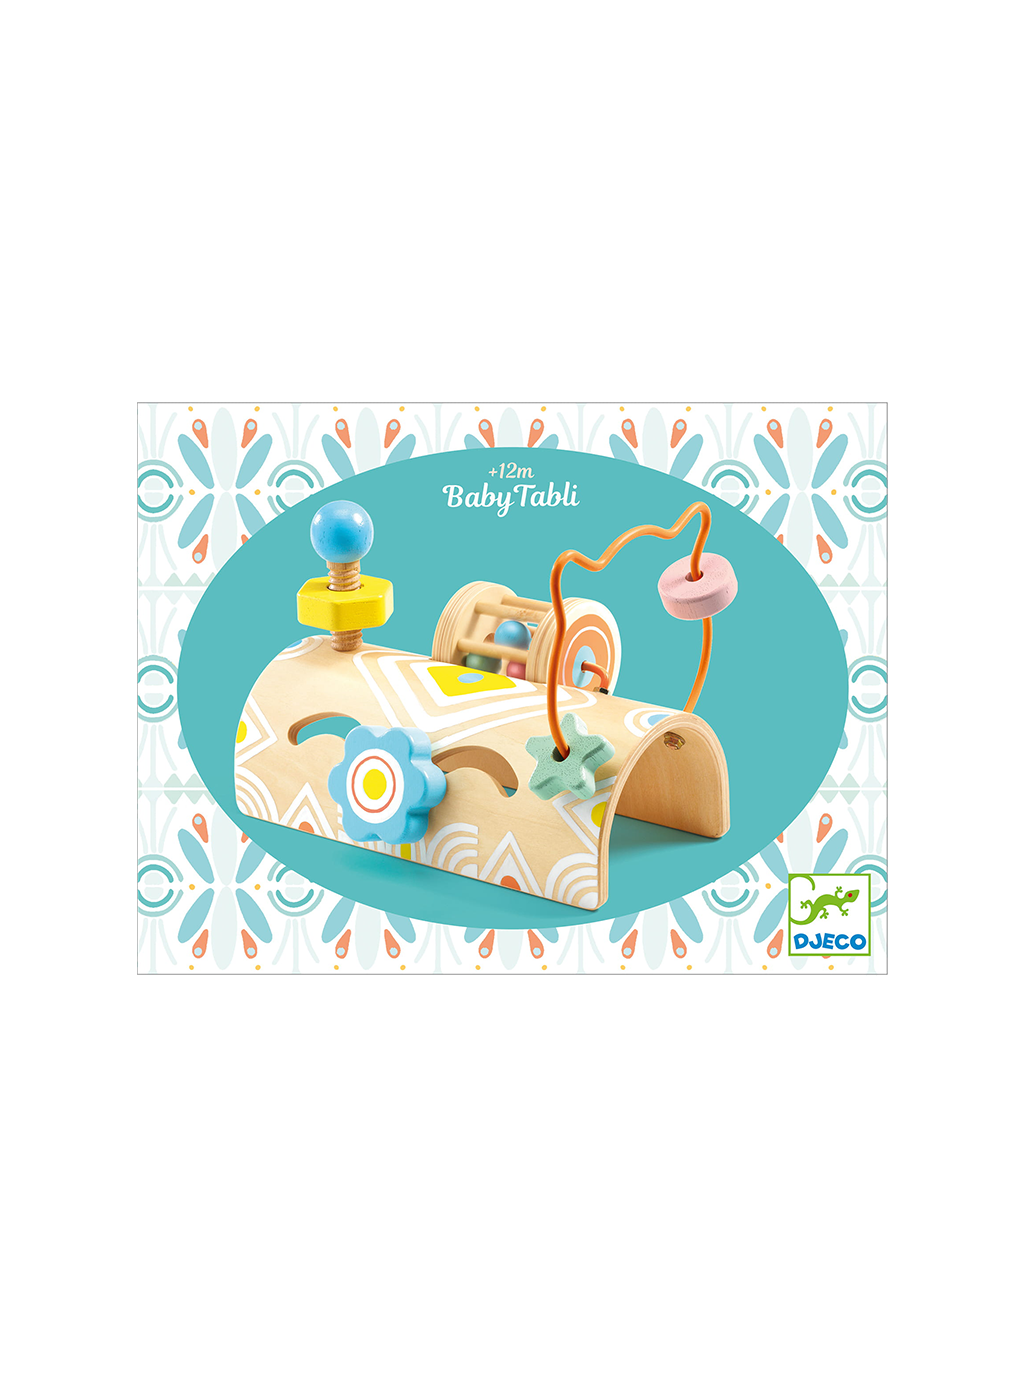 Baby Activity Table